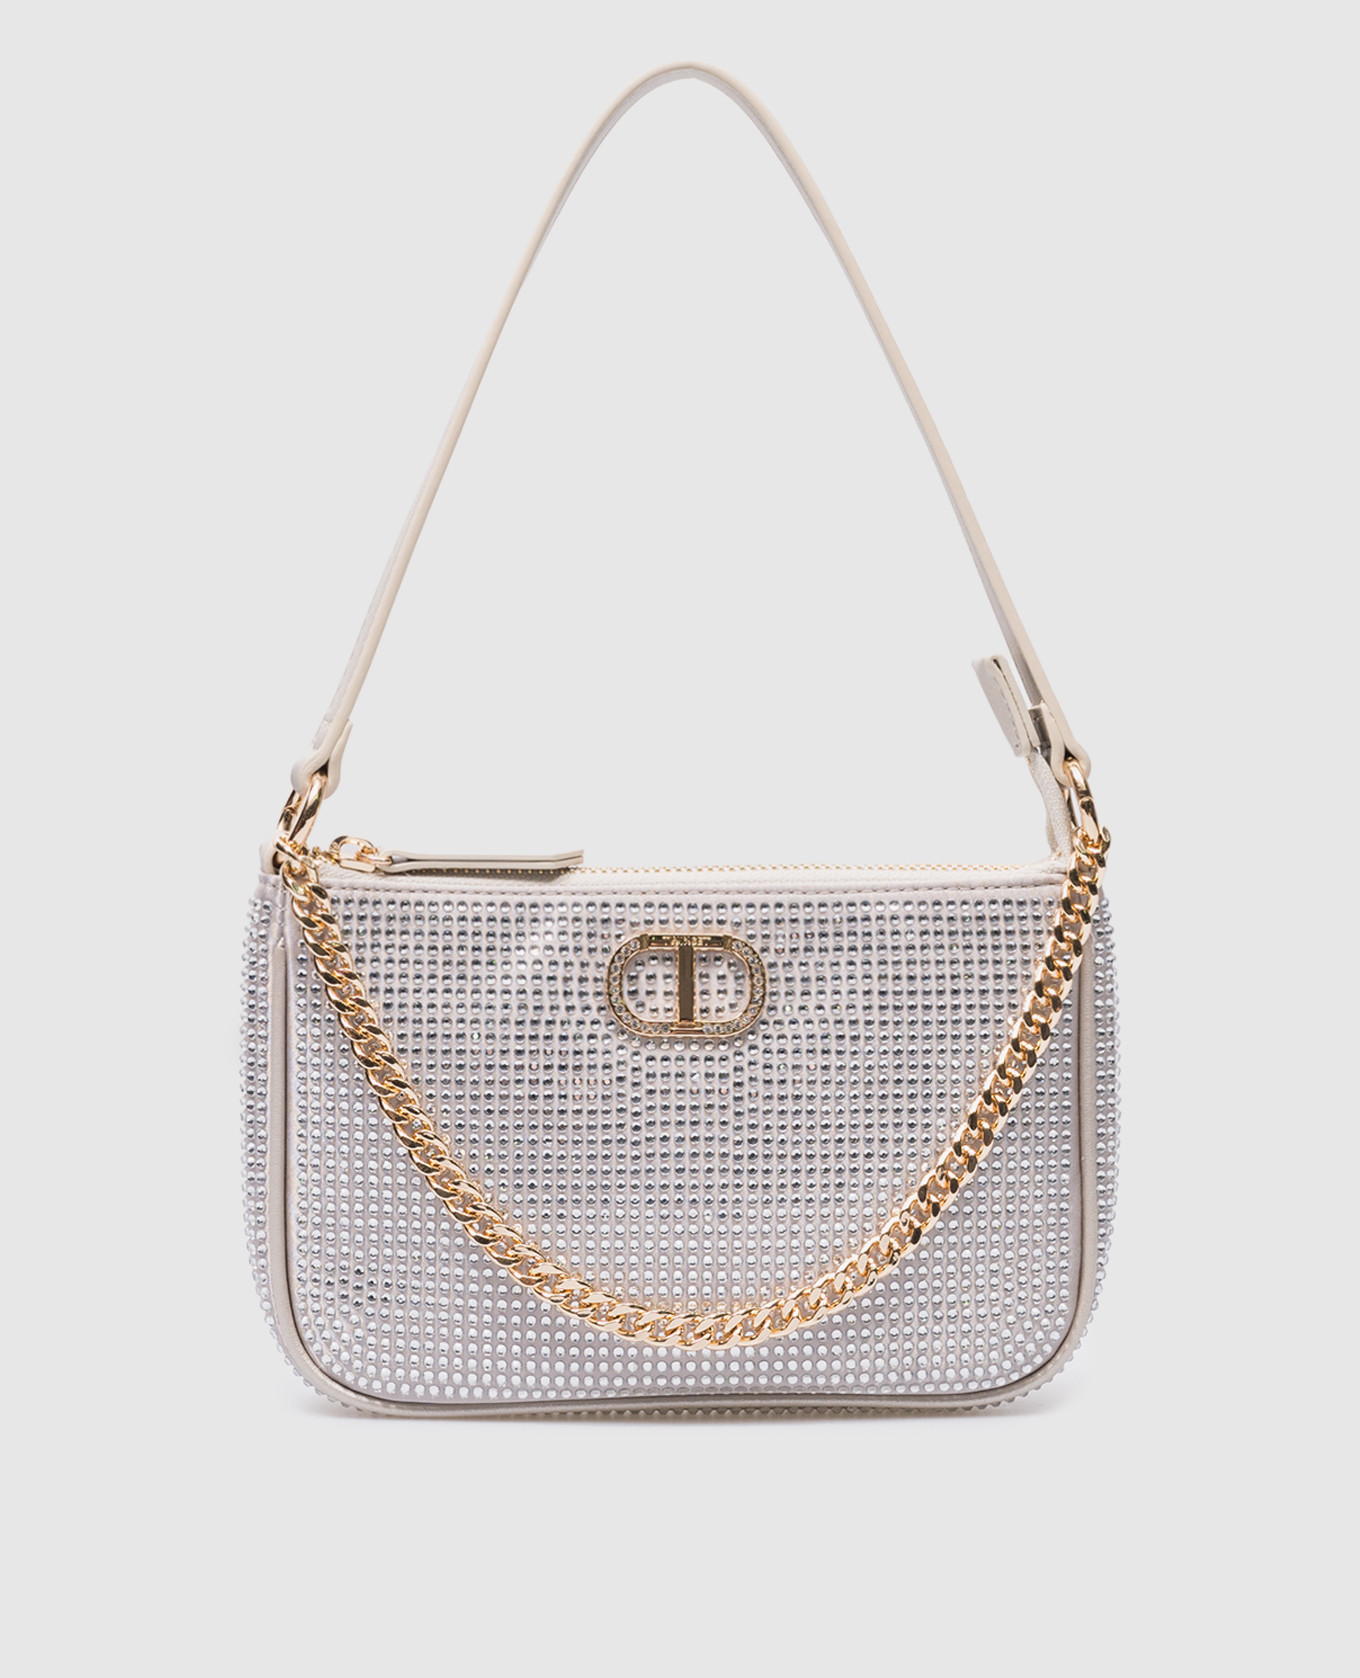 Petite bag in silver with crystals and logo